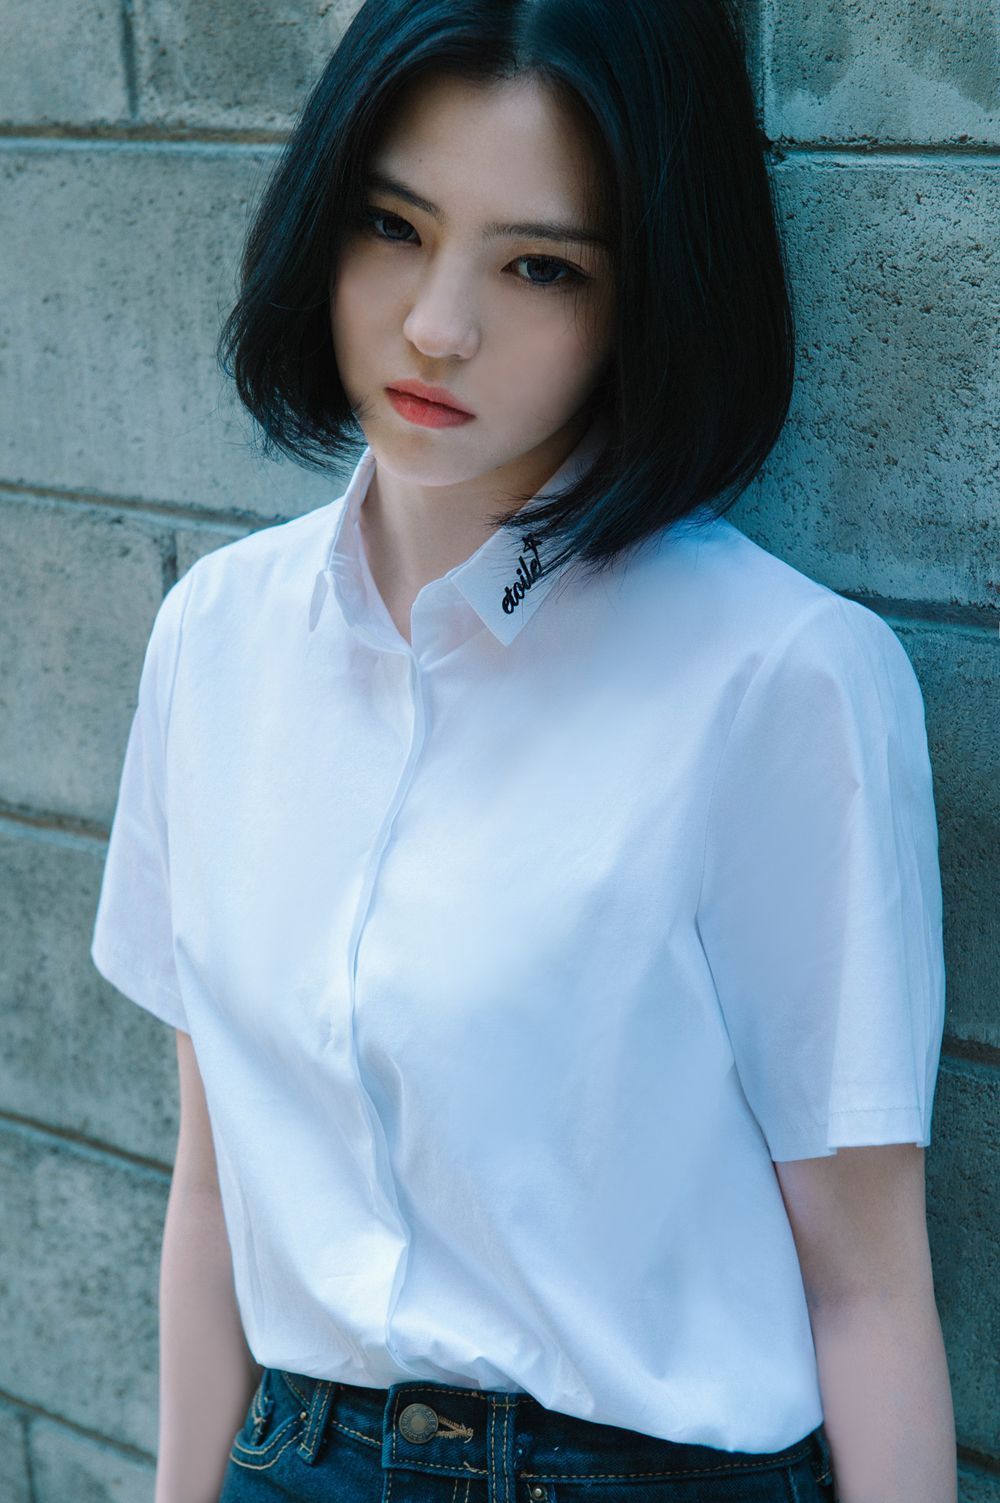 The World of The Married Actress Han So Hee Began Acting For One.